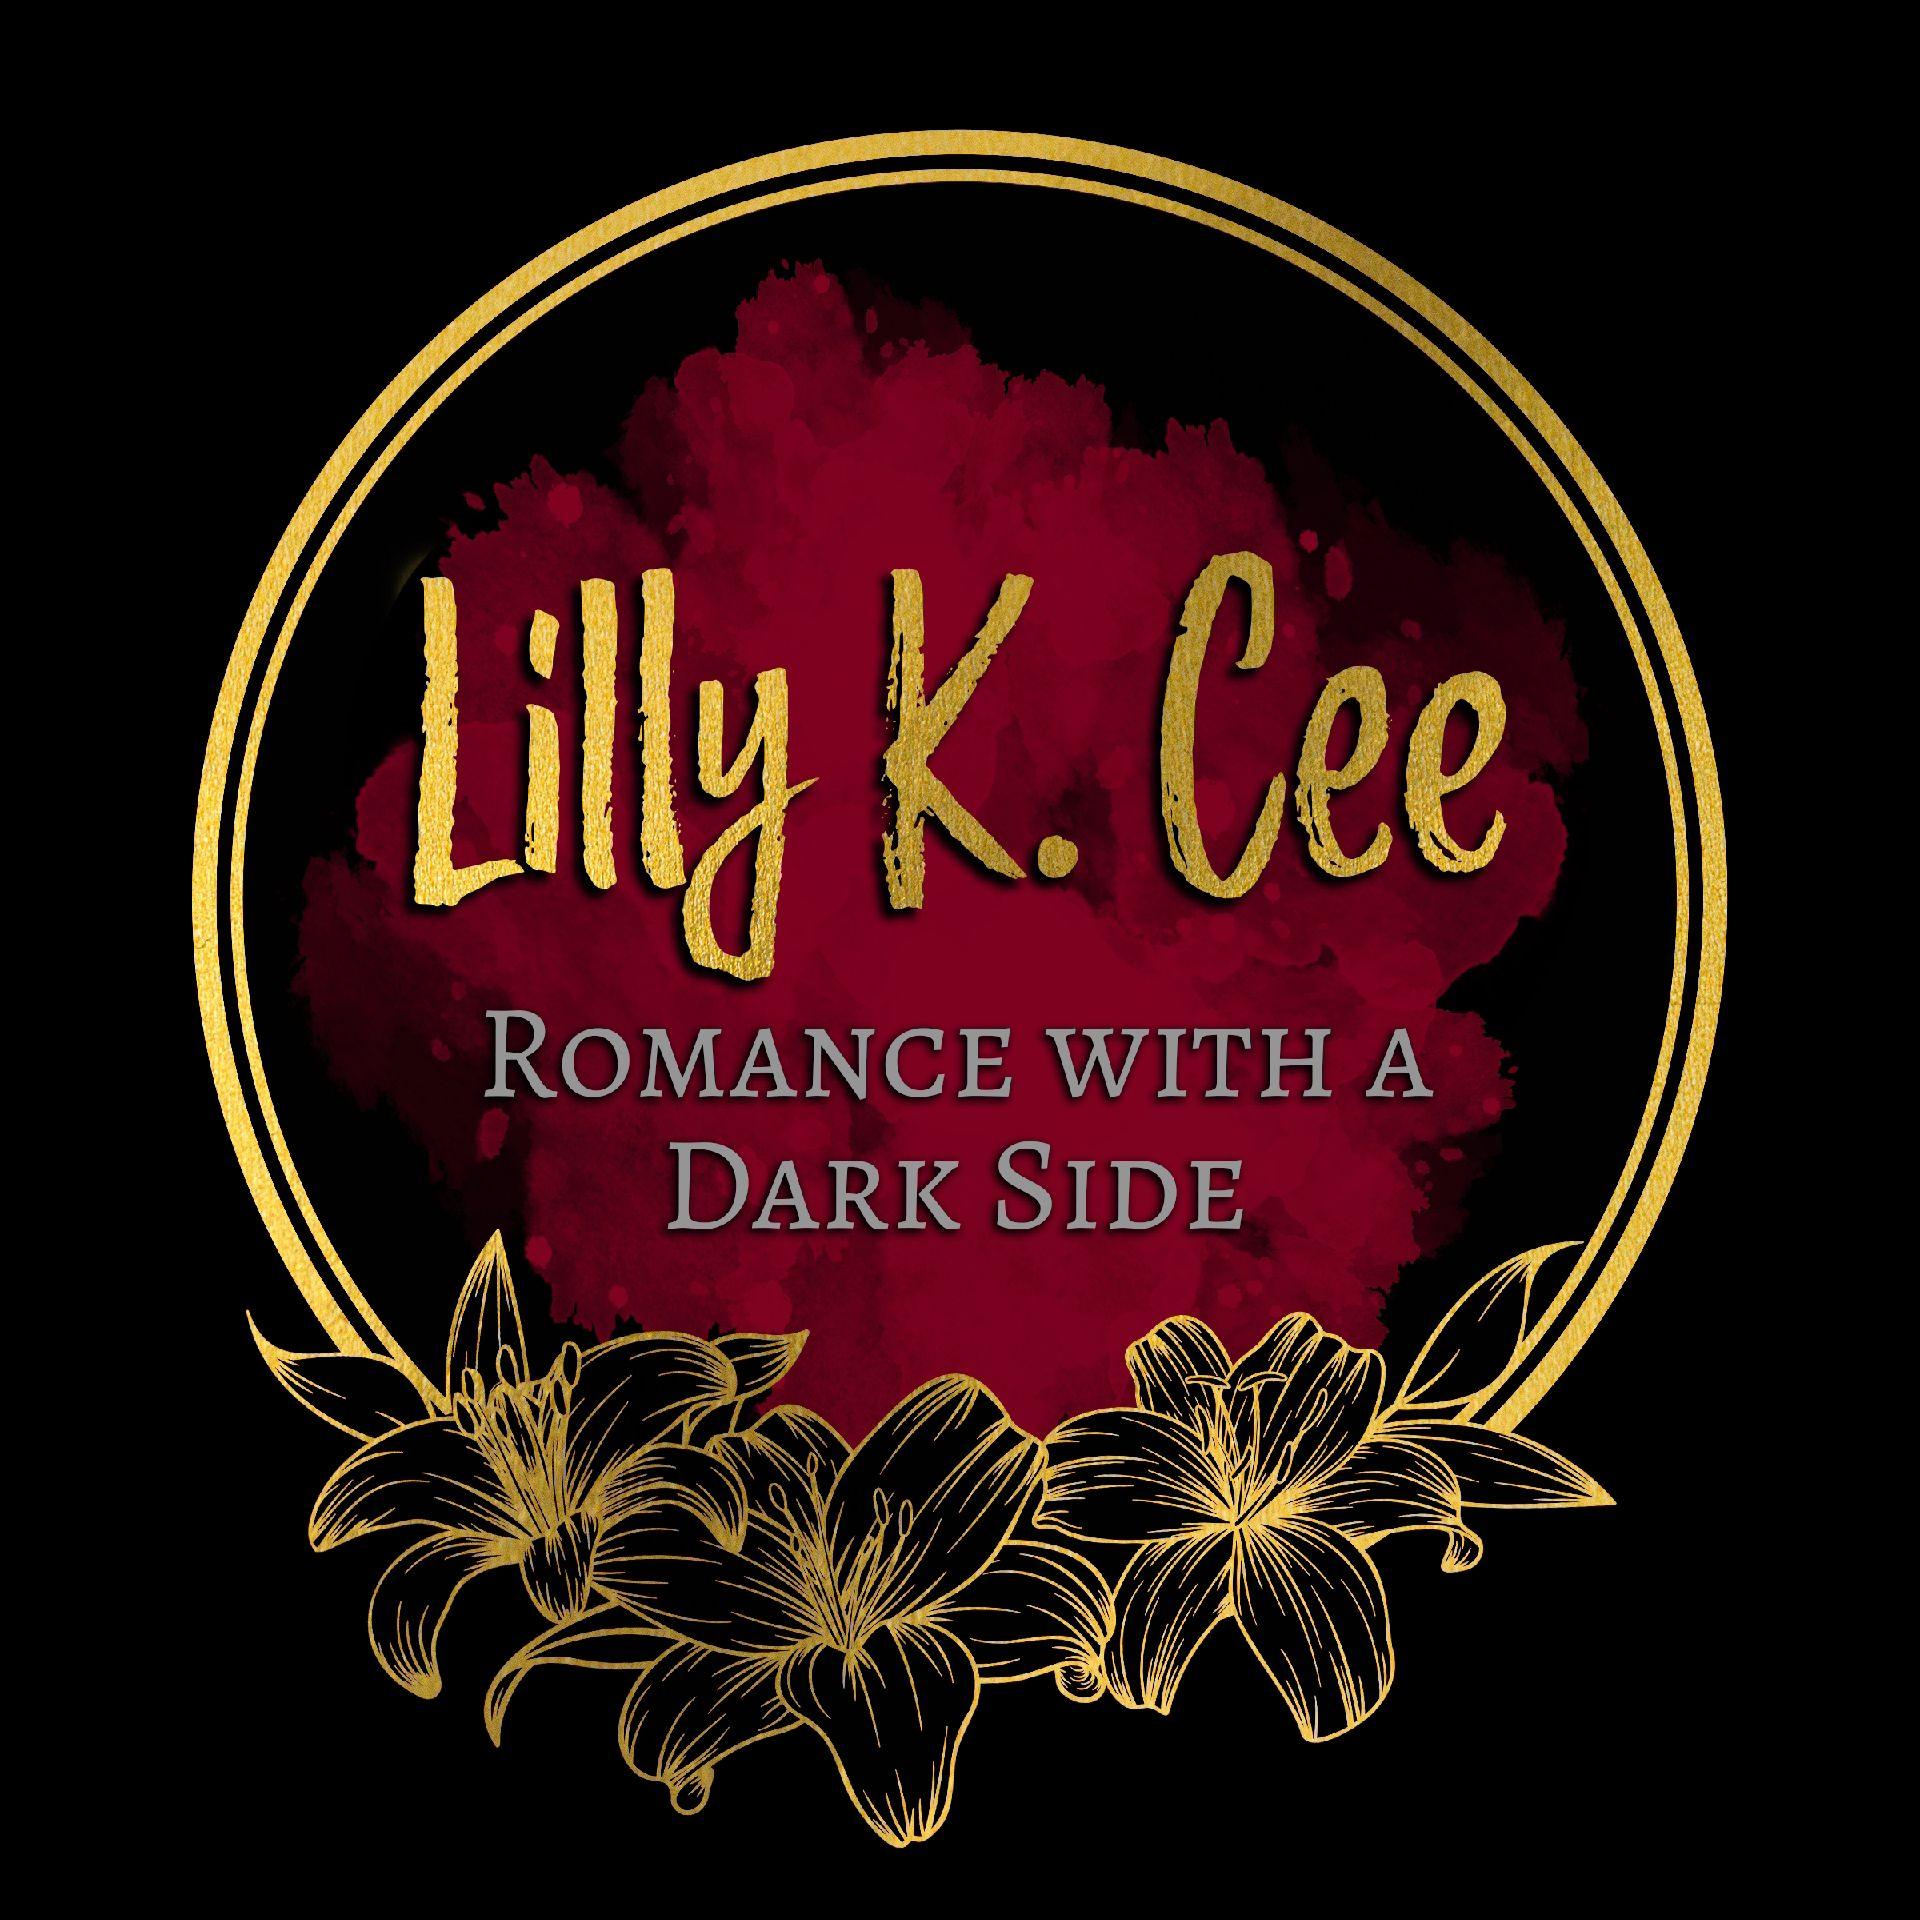 Lilly K Cee's images